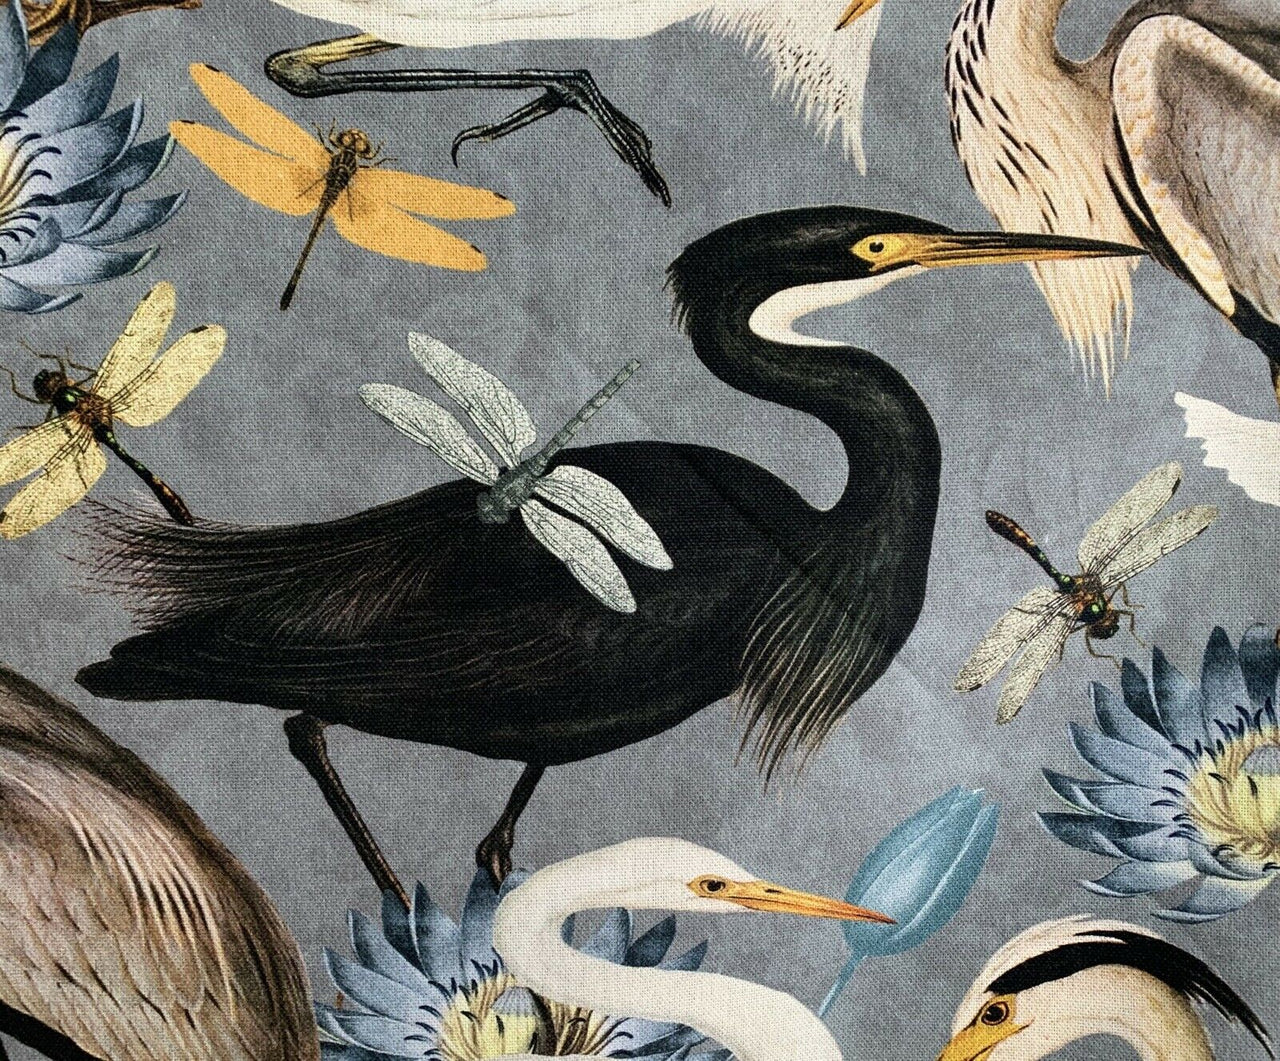 Herons Birds fabric By Meter Grey Cotton Sewing Material Romantic Lotus Floral Pattern Tulips Grey Blue Yellow Textile